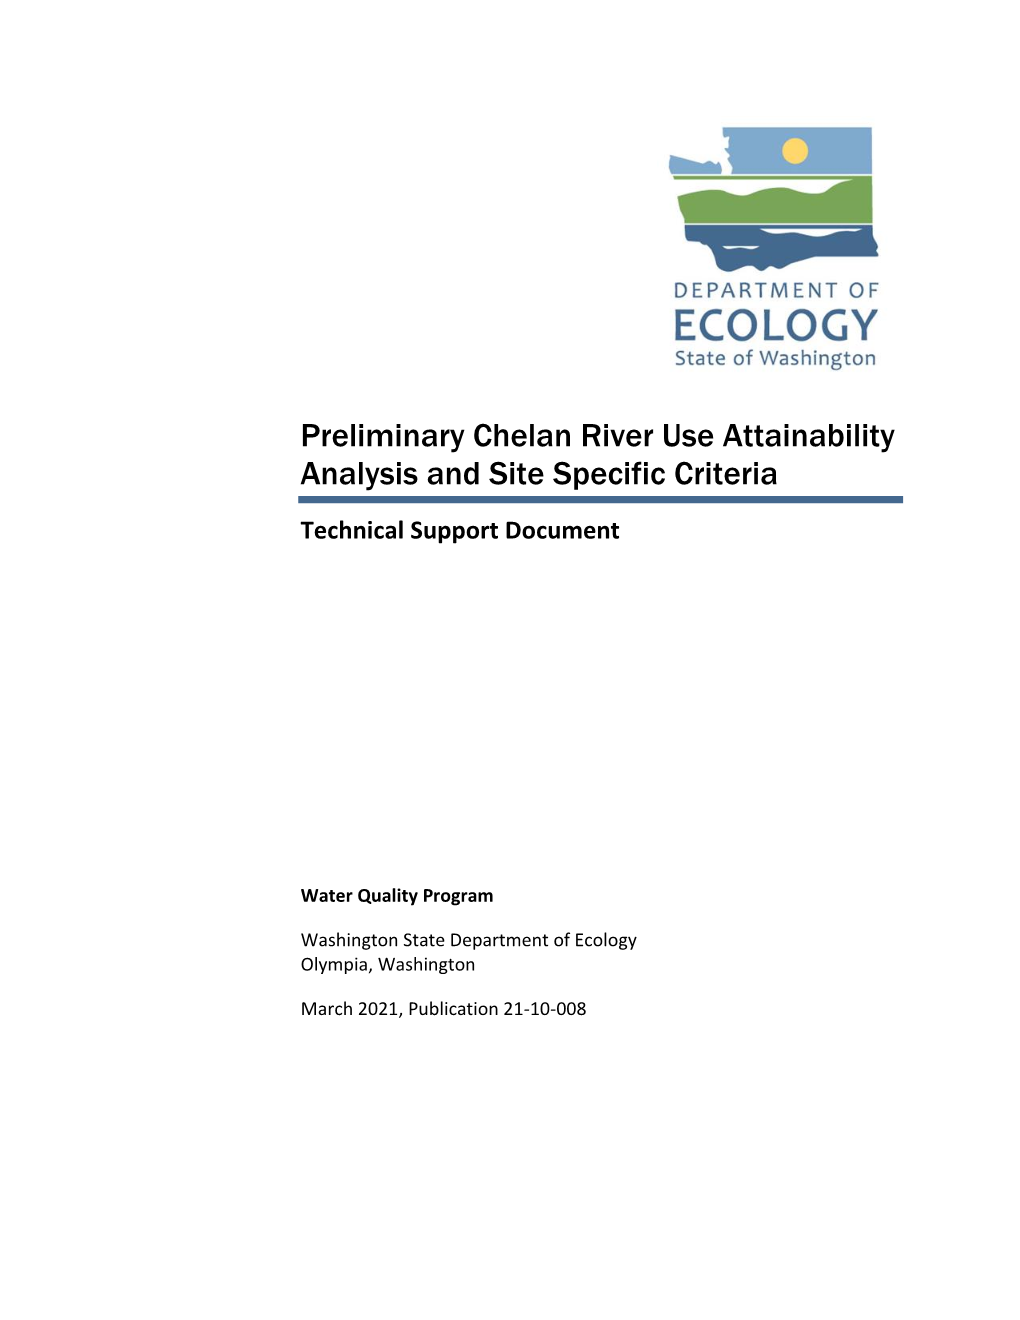 Chelan River Use Attainability Analysis and Site-Specific Criteria